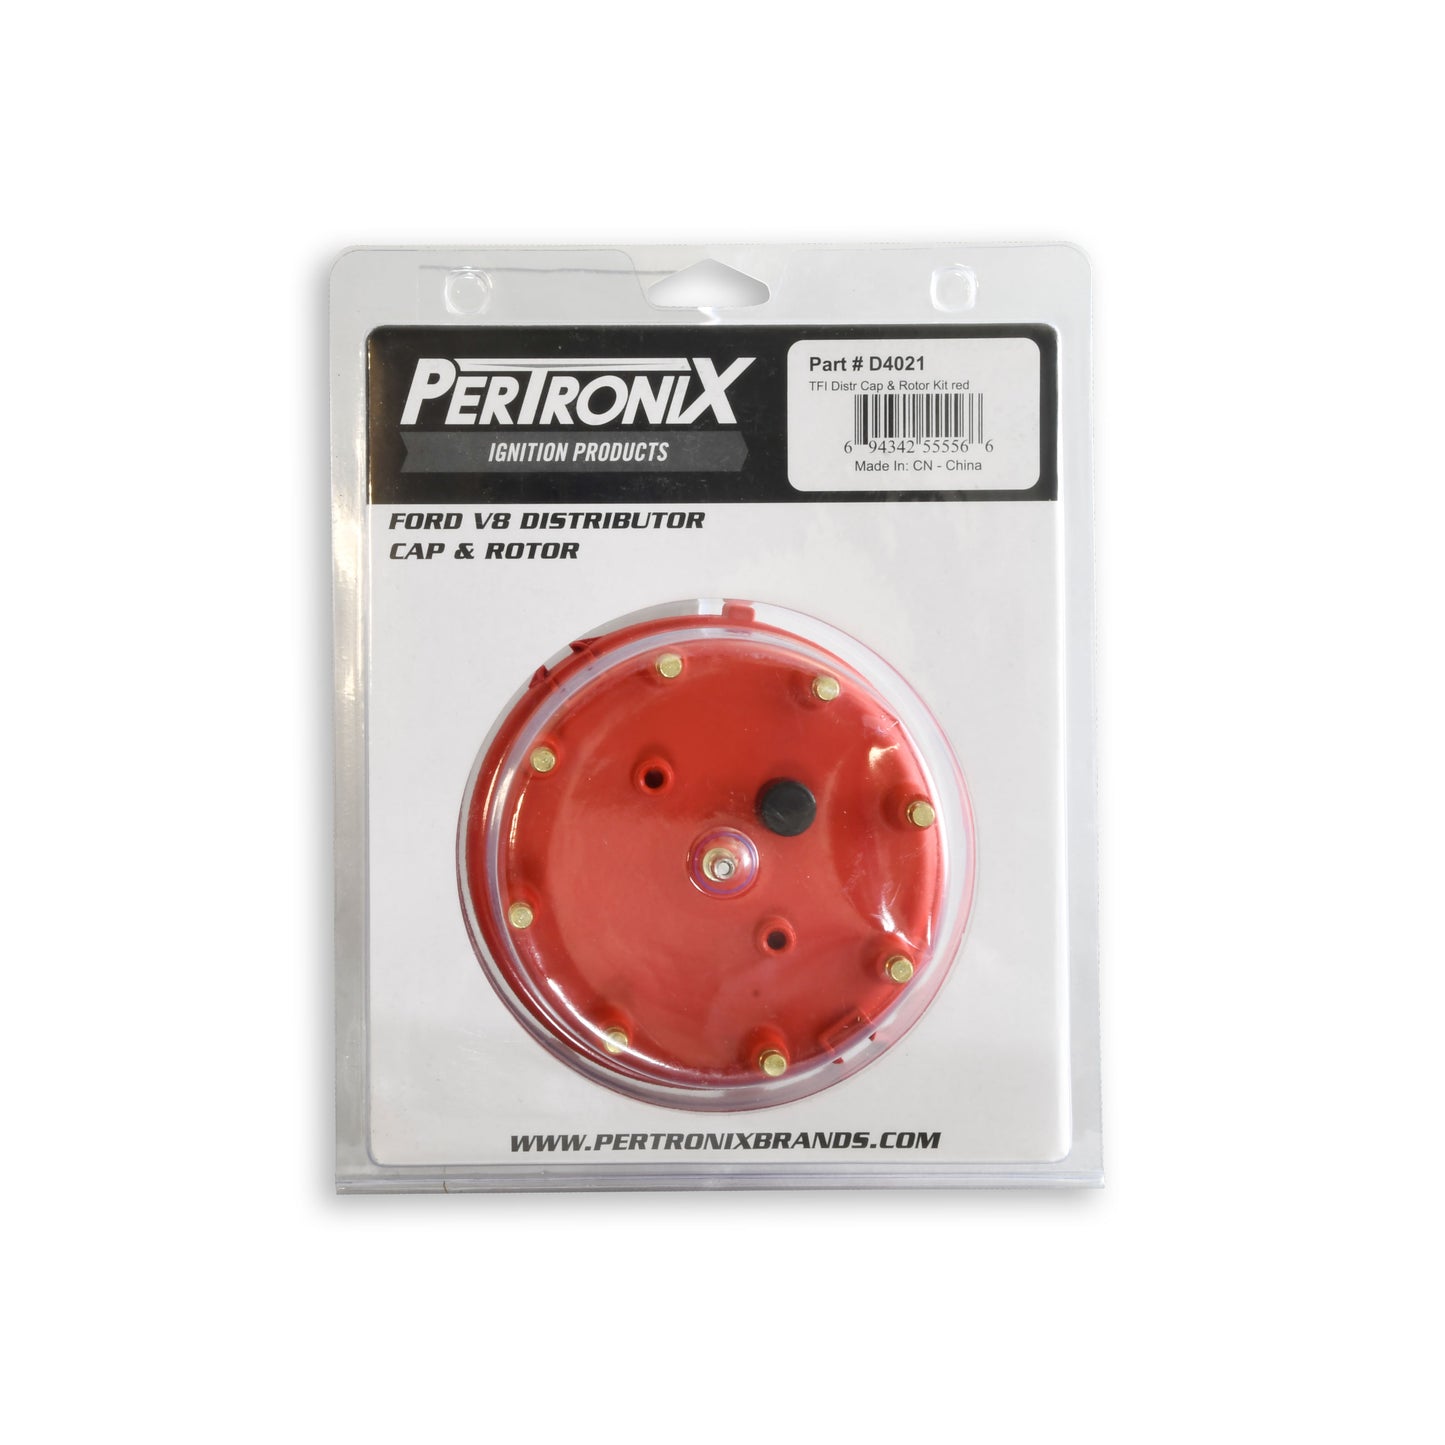 PerTronix D4021 Flame-Thrower Ford TFI Distributor Cap and Rotor Kit